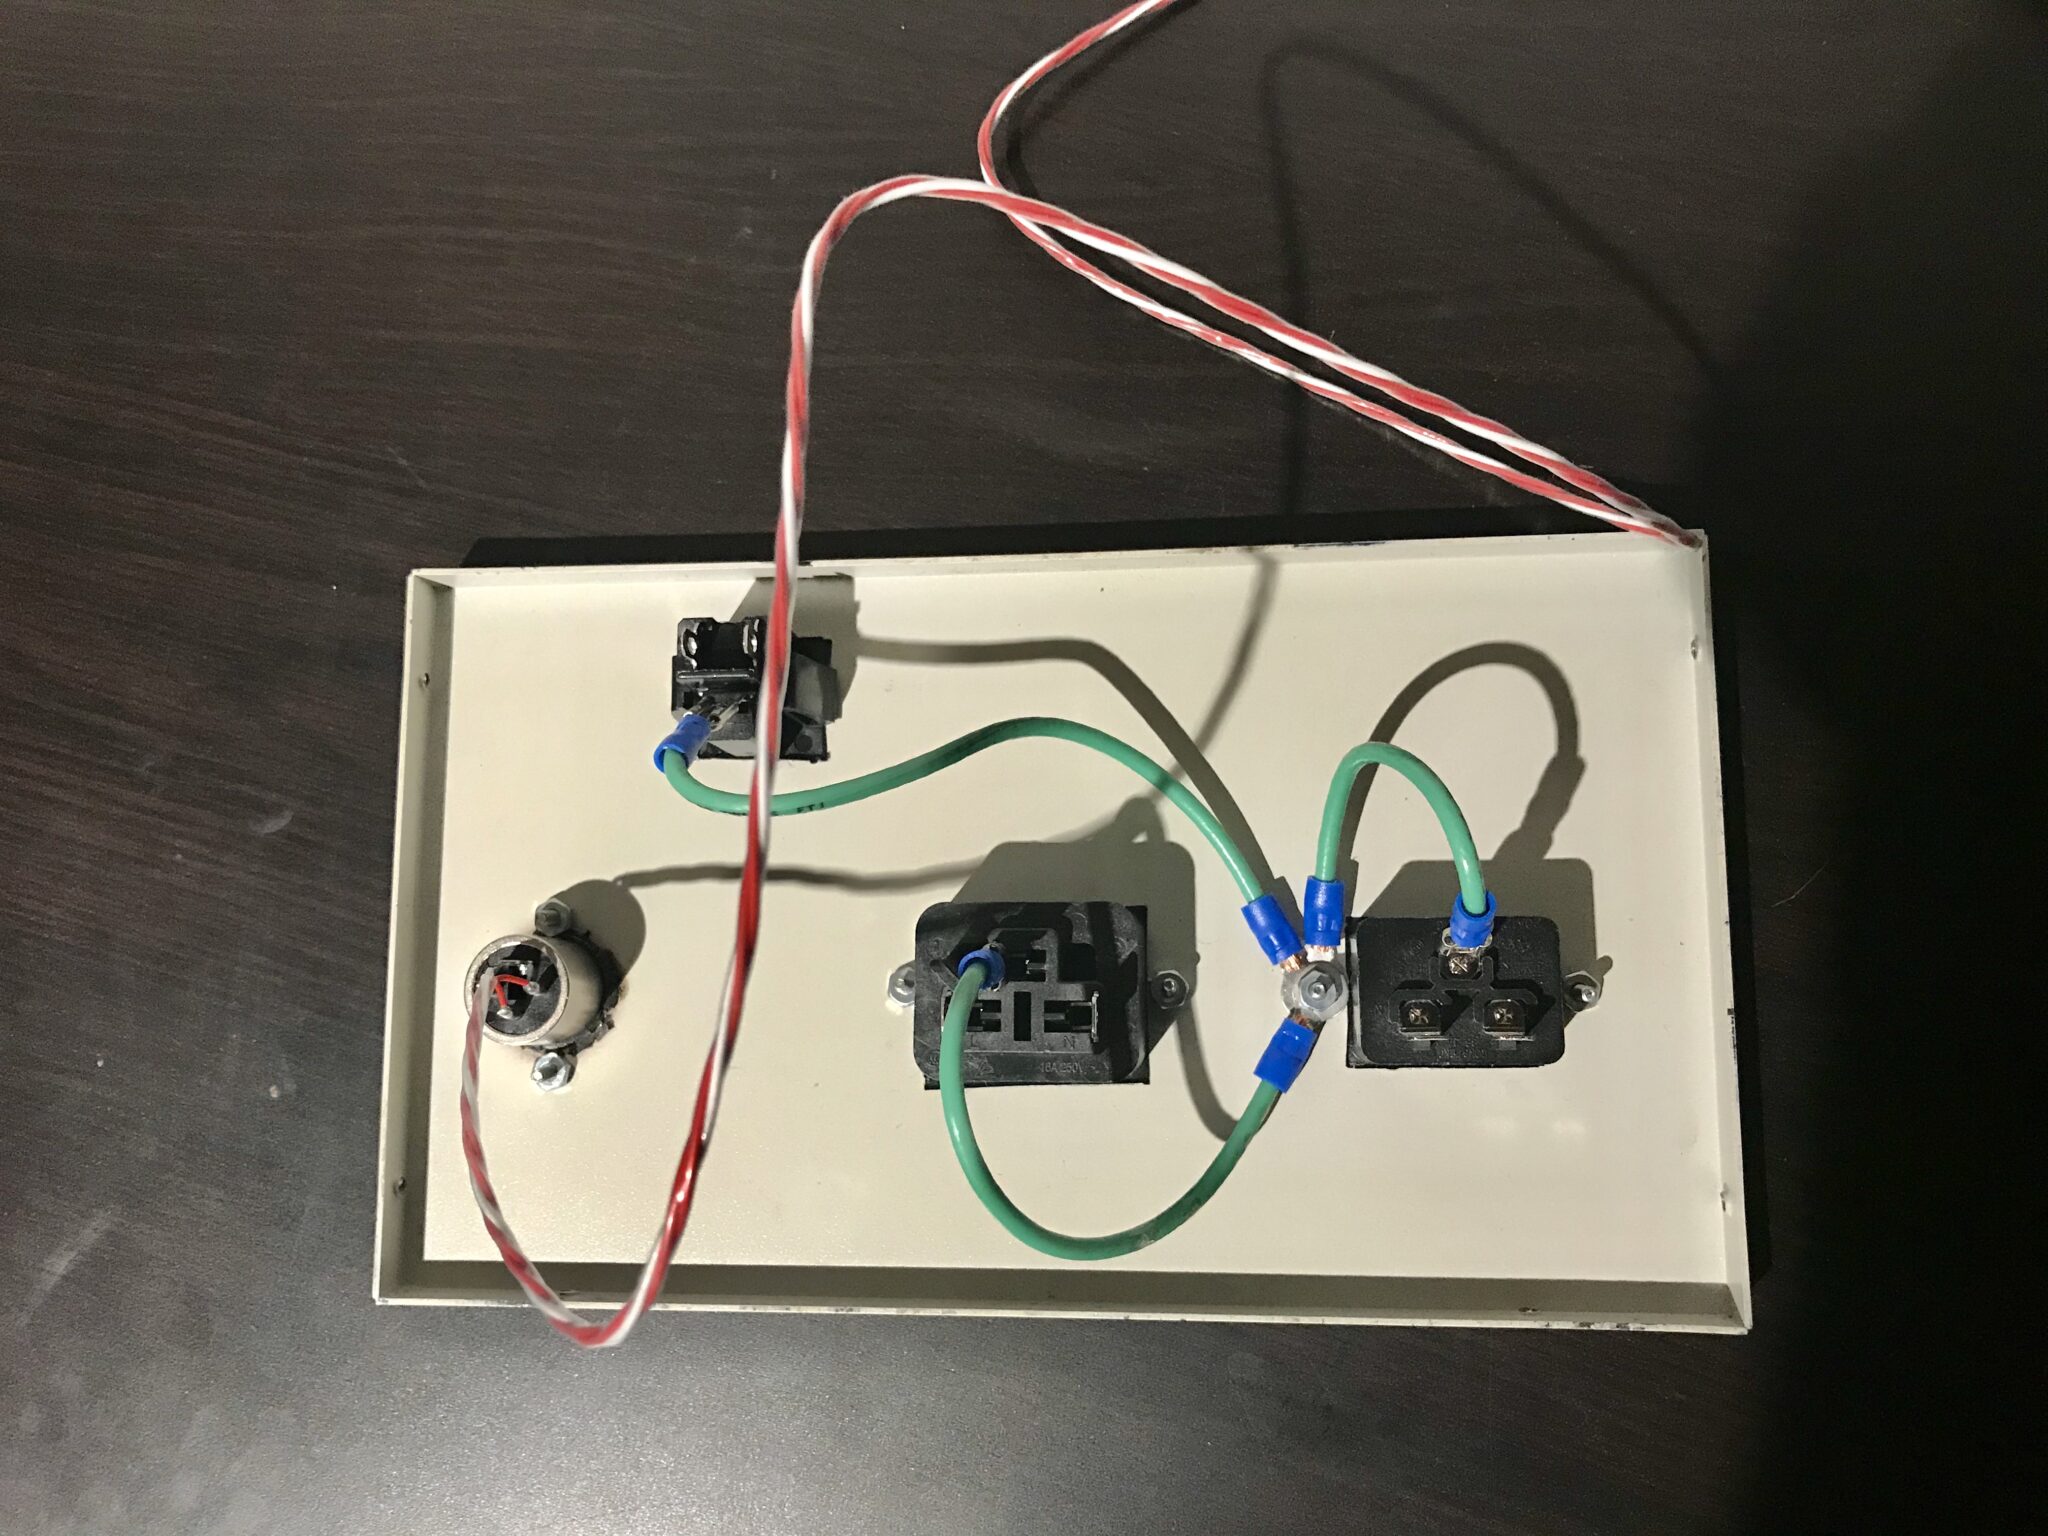 Building an Electric Brewing Controller - The Electric Brew in a Bag